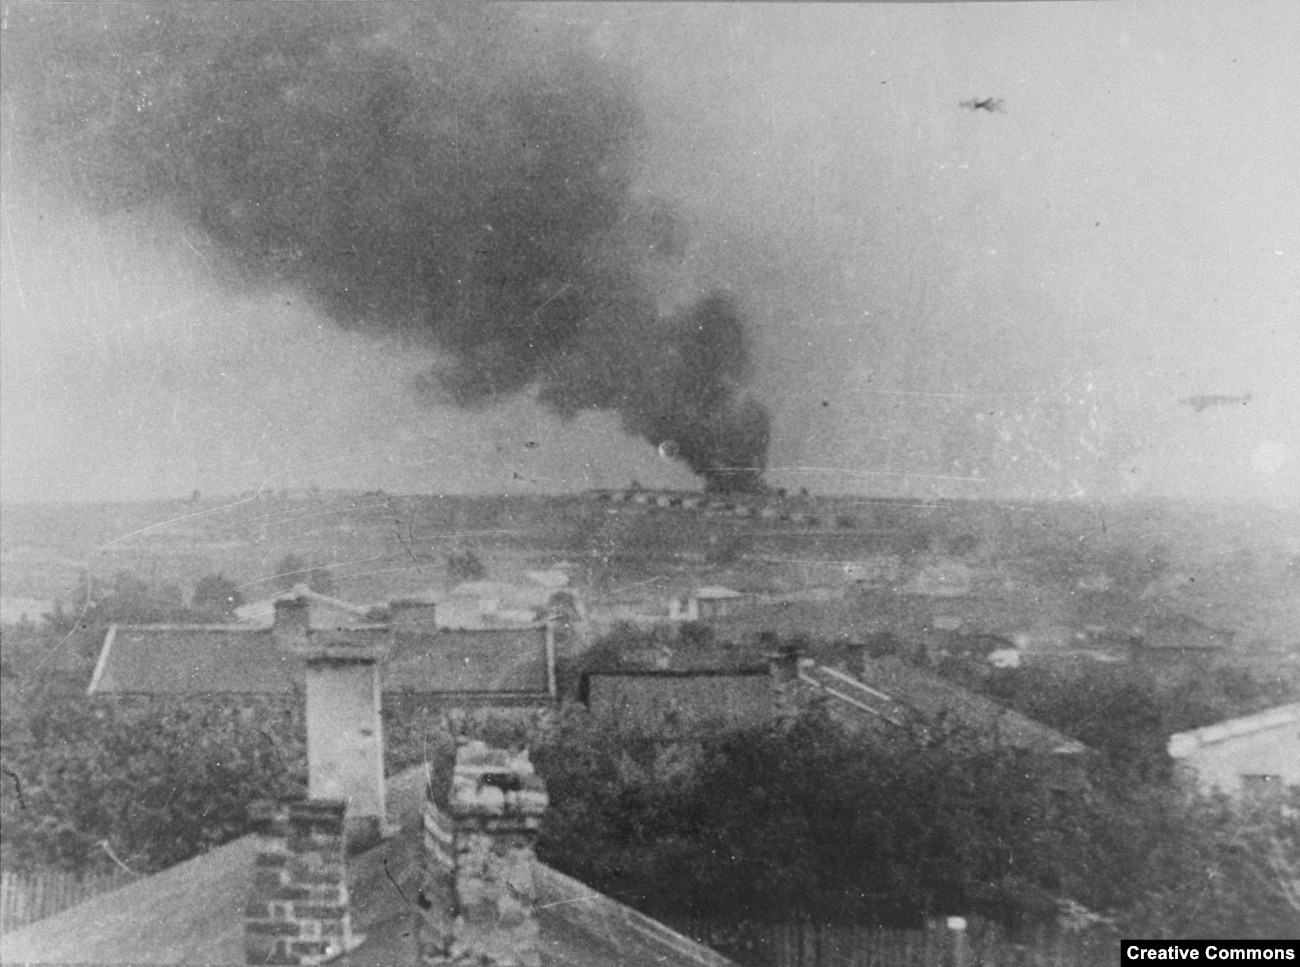 Smoke rises from the Majdanek extermination camp in October 1943.